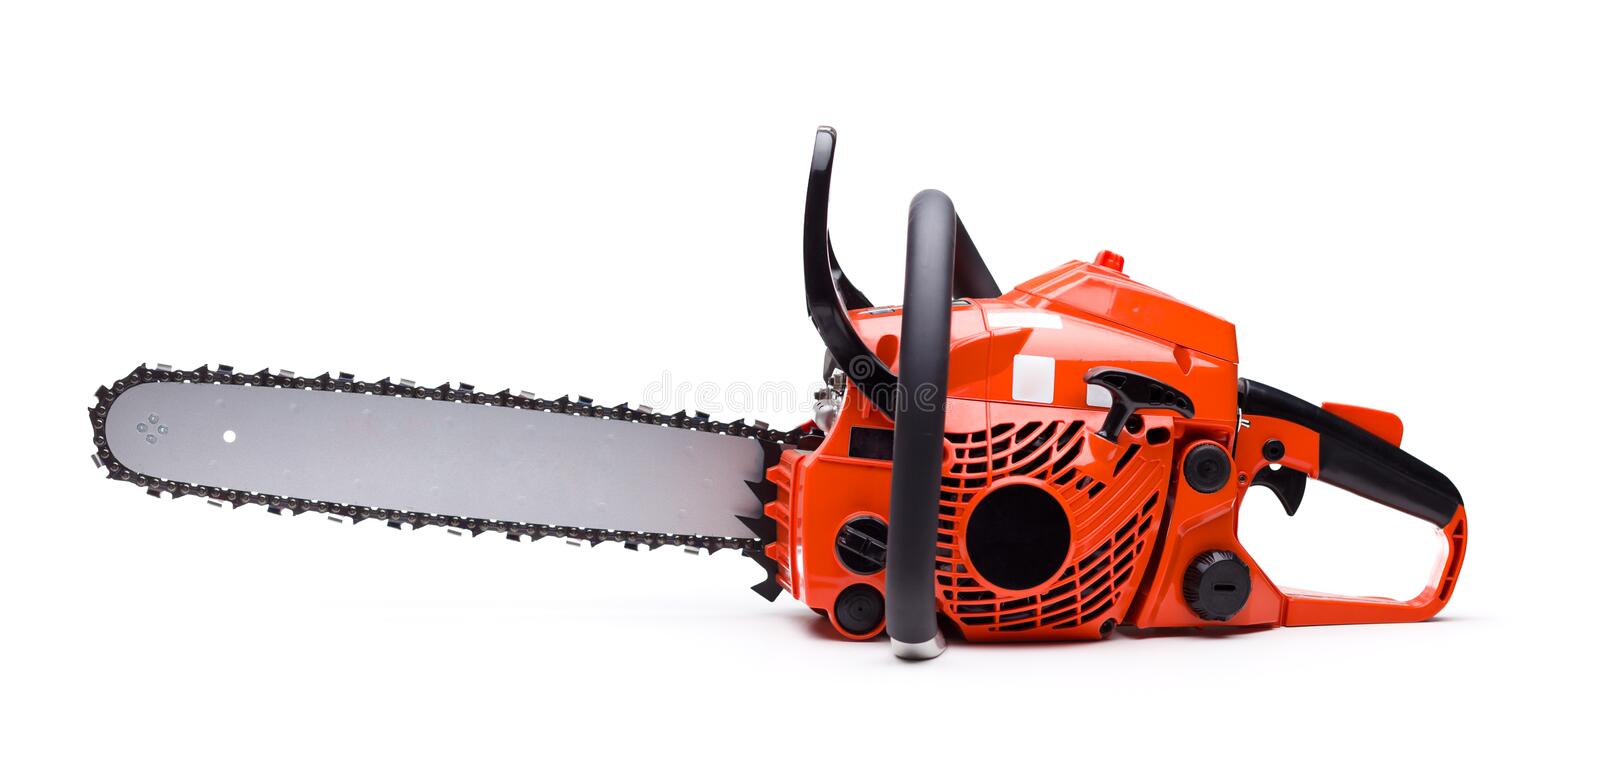 Detail Chainsaw Image Nomer 9